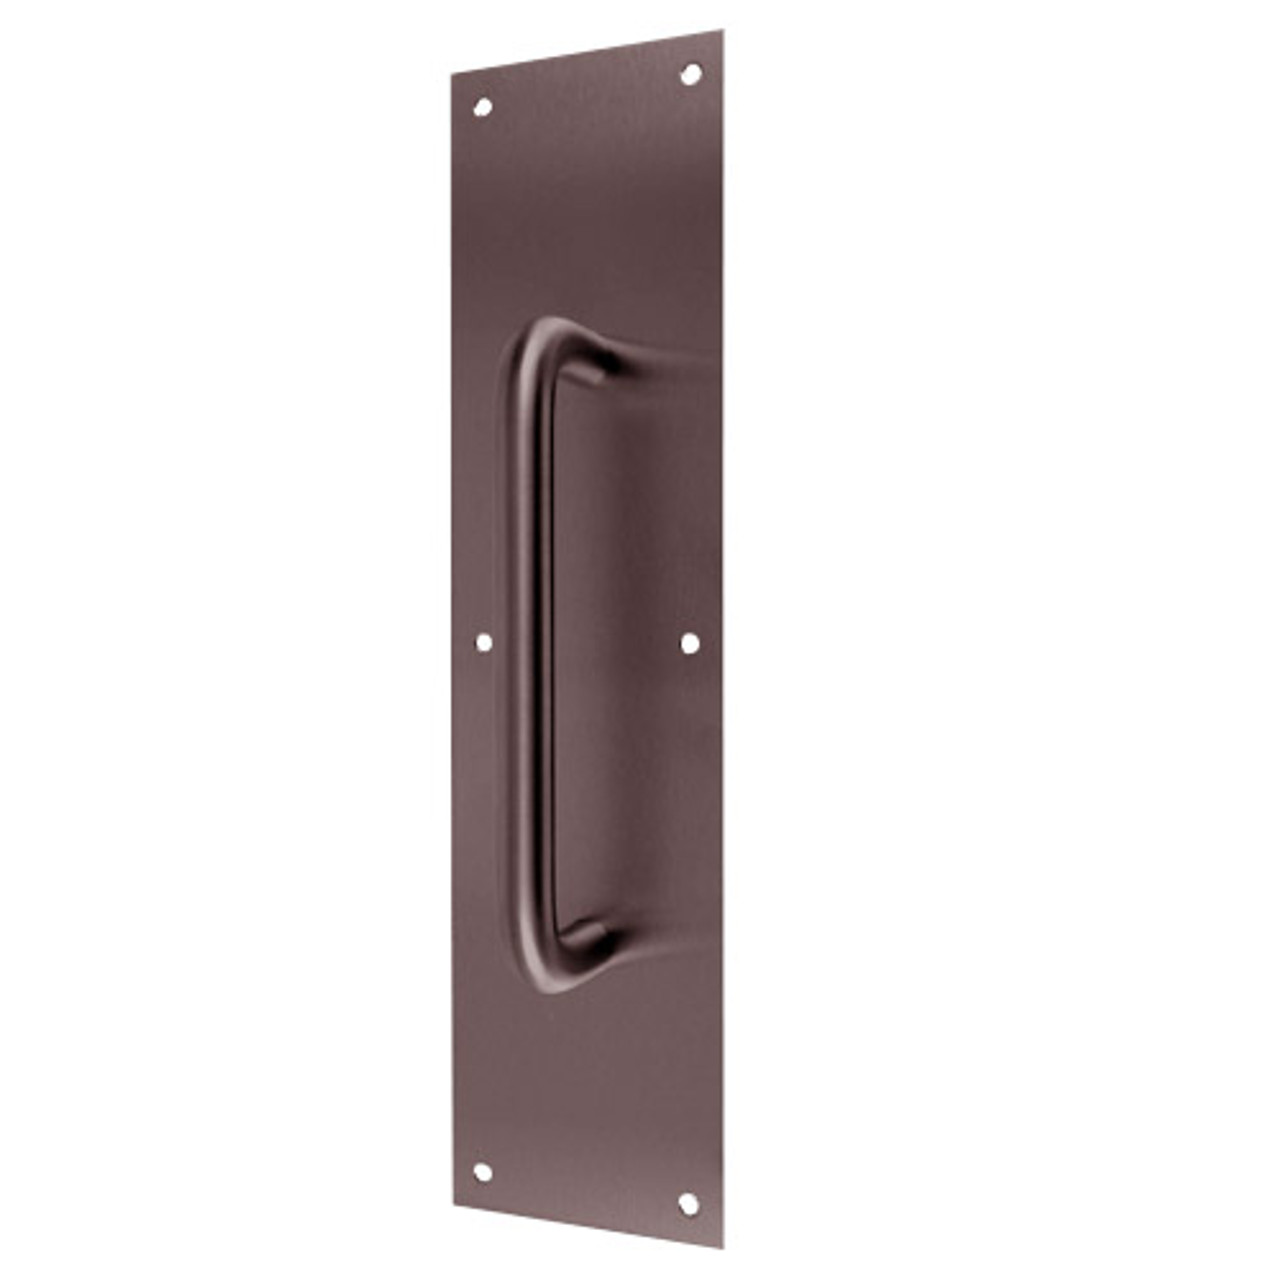 7015-613 Don Jo Pull Plates with 3/4" Round Pulls in Oil Rubbed Bronze Finish